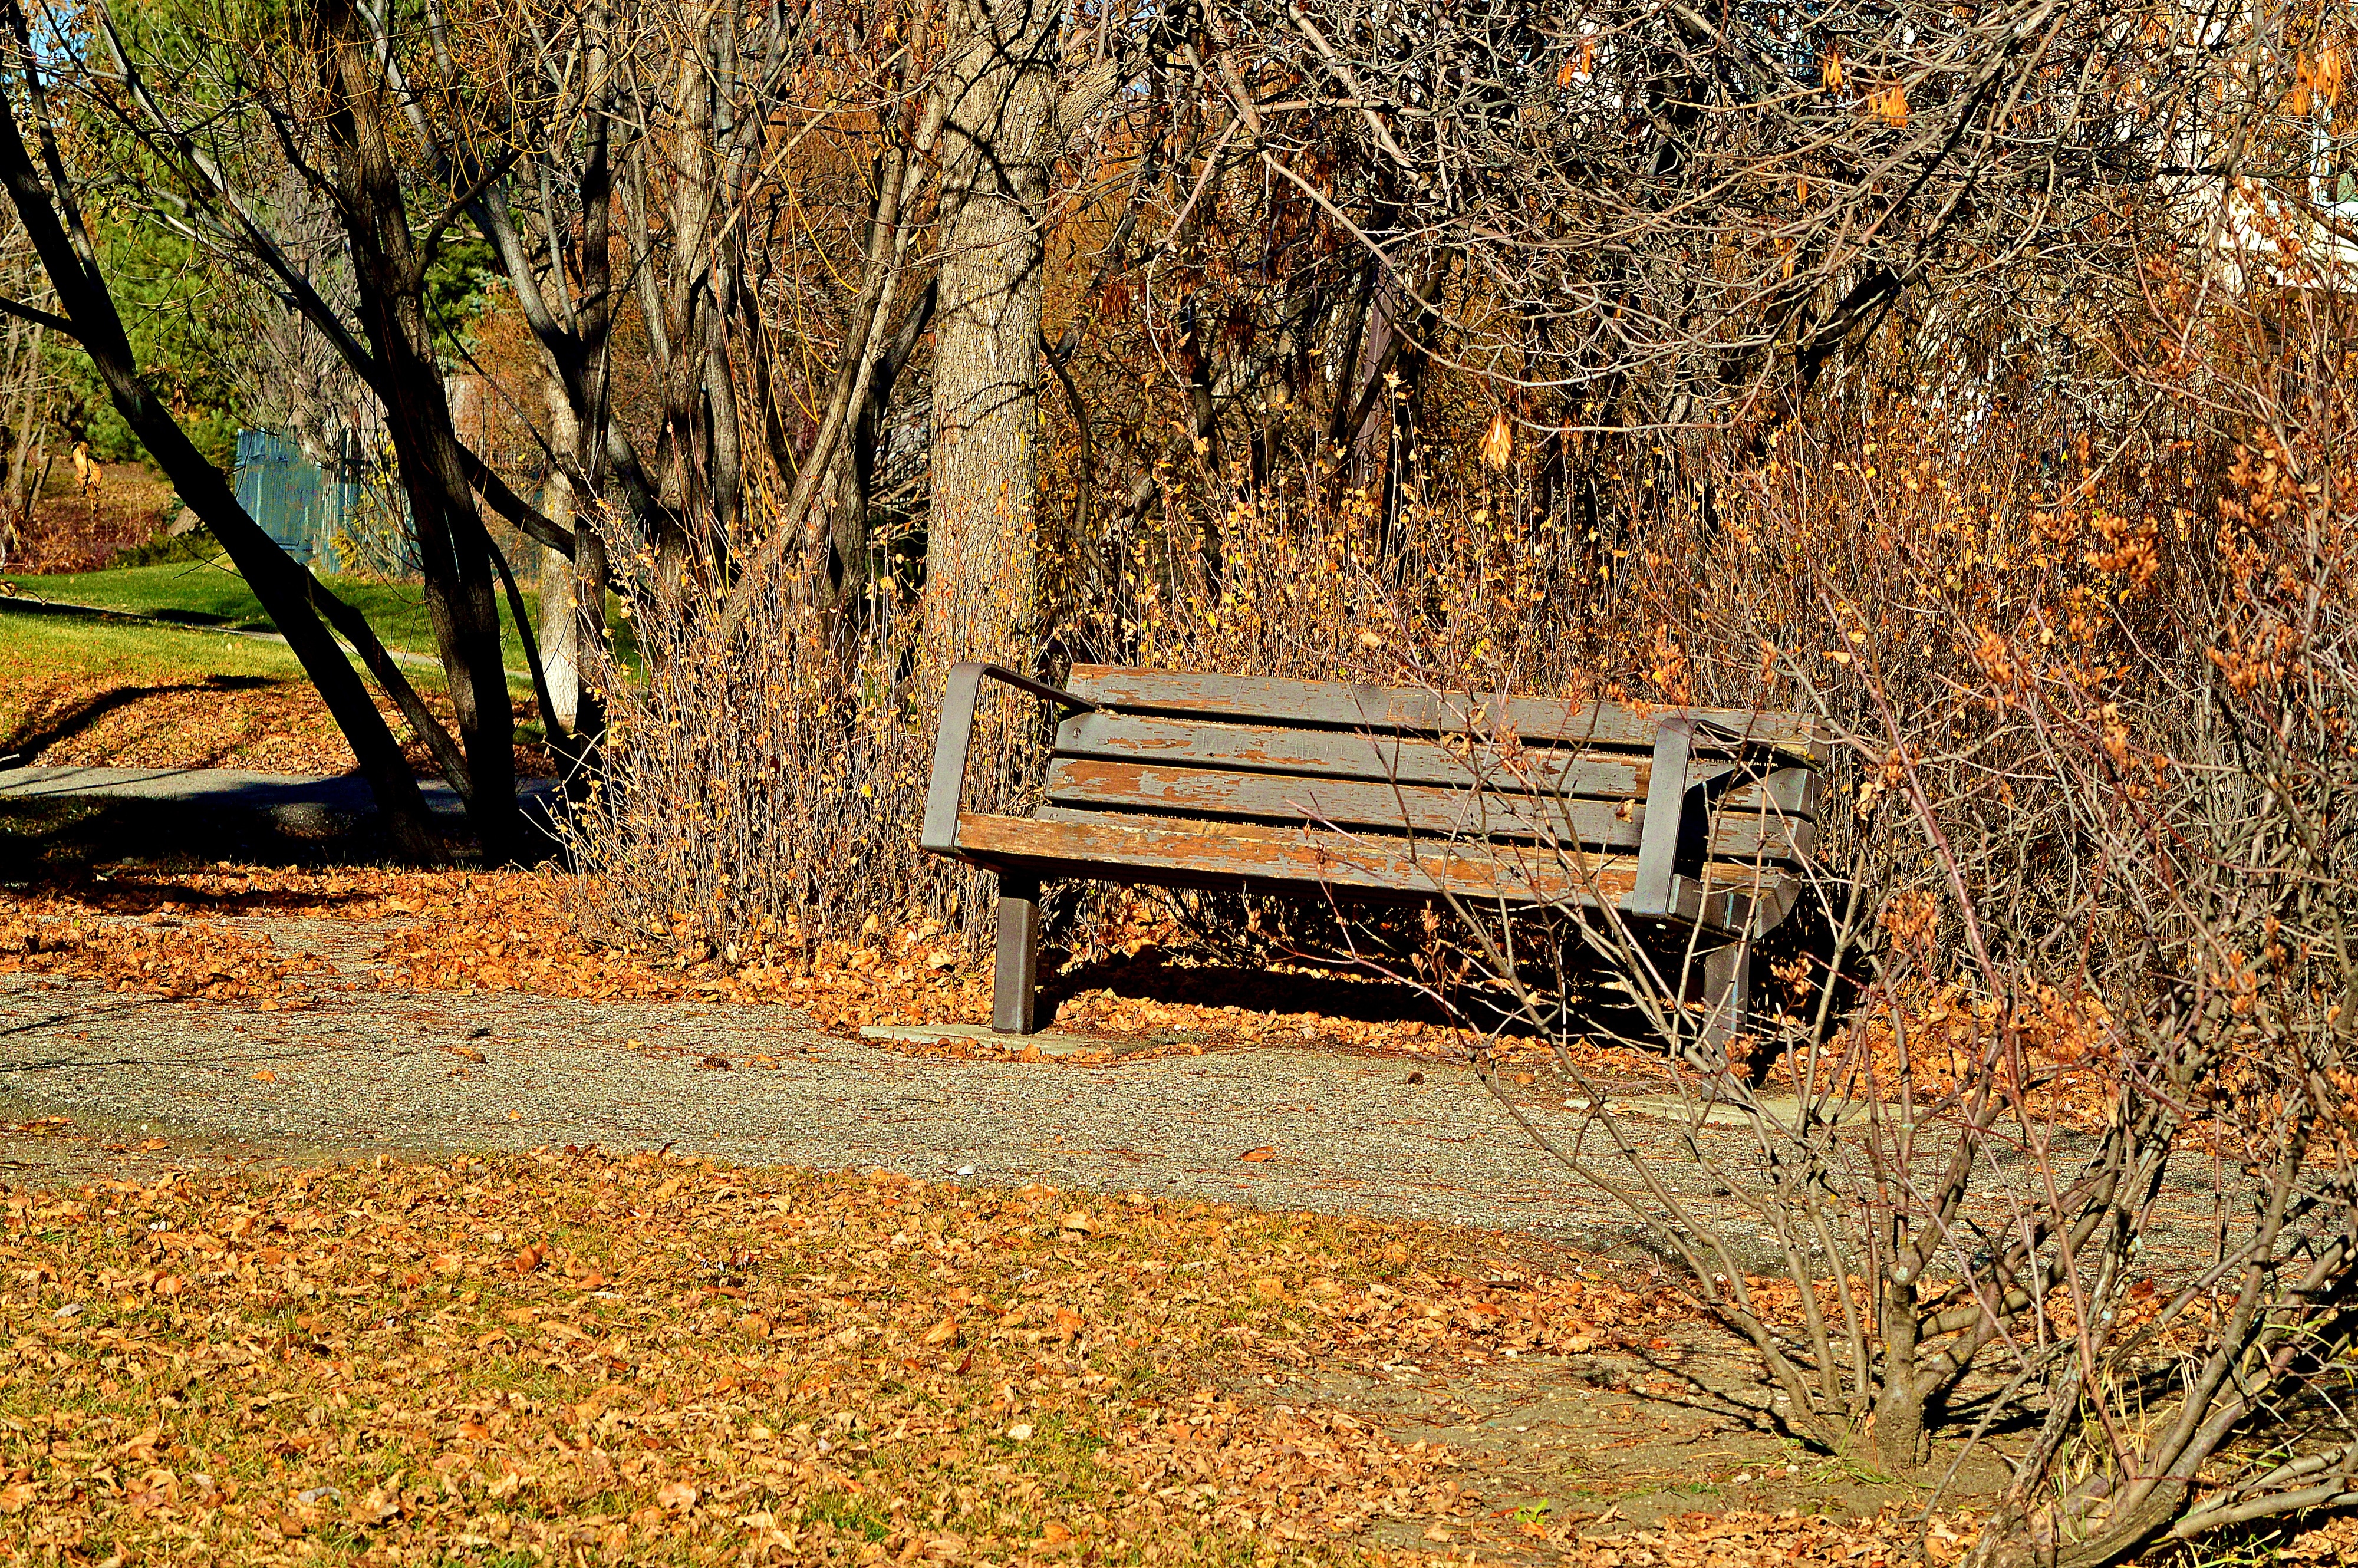 brown bench